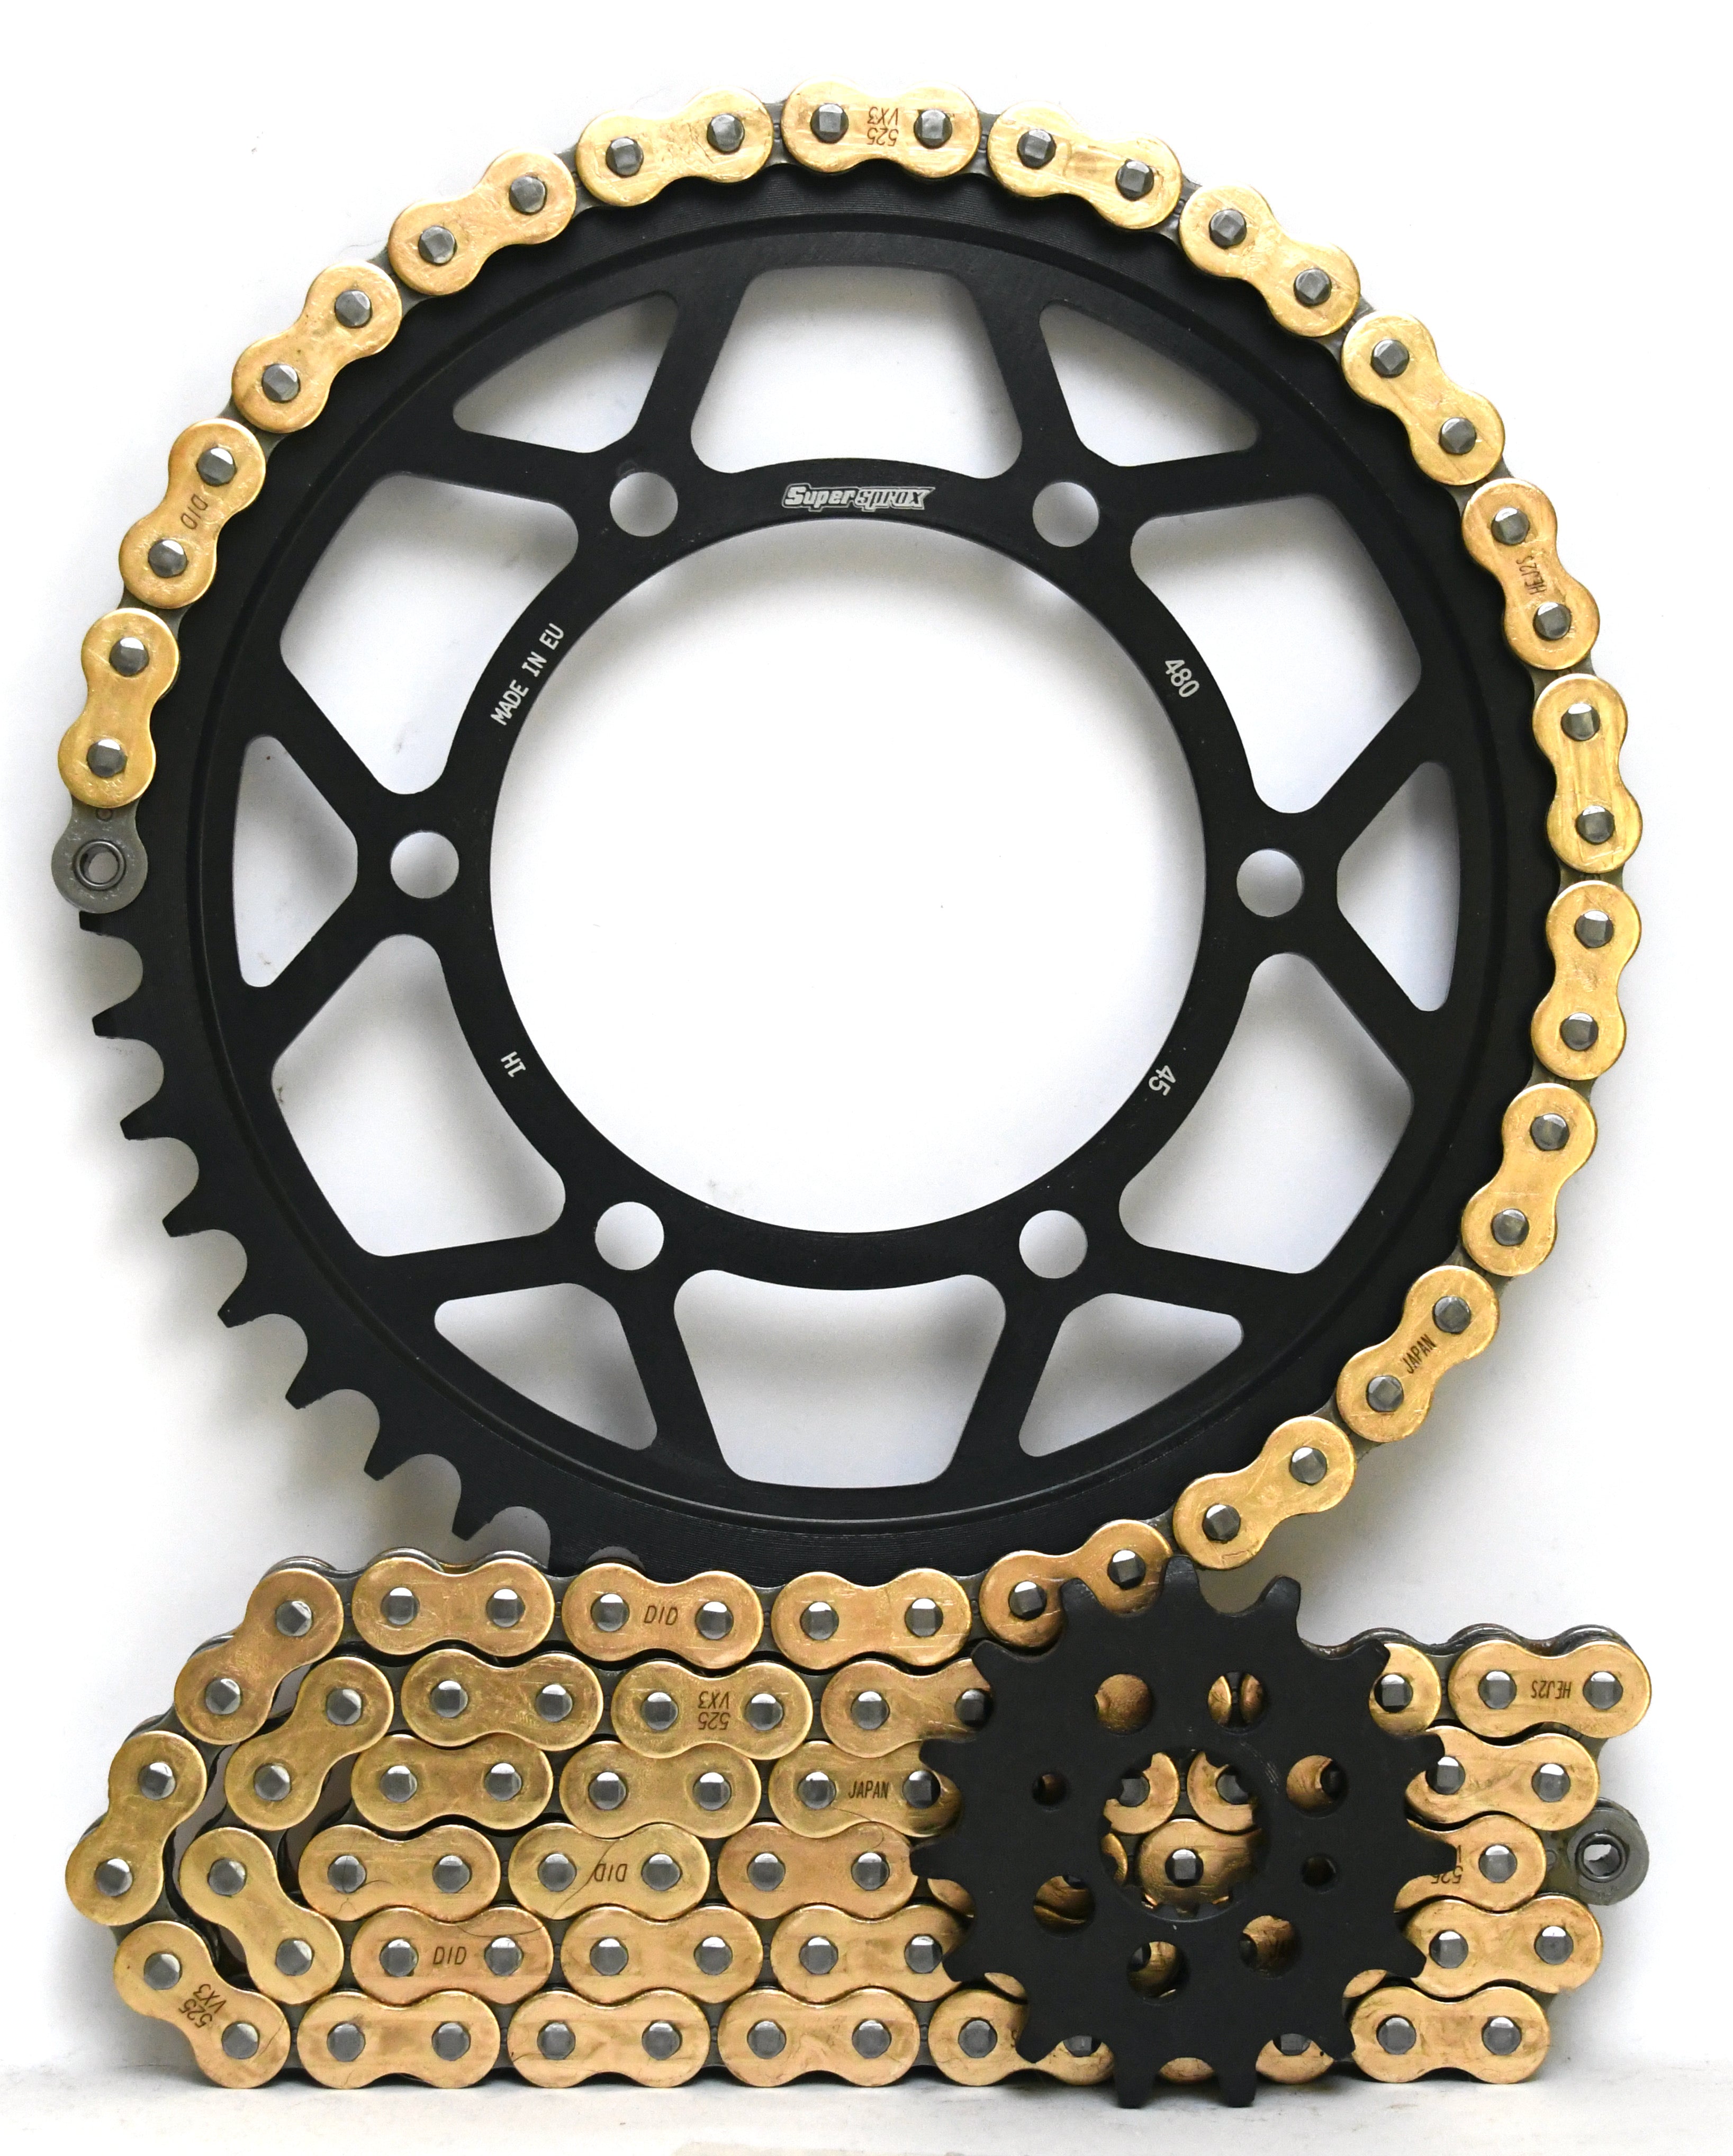 Supersprox Chain & Steel Sprocket Kit for Yamaha YZF R1 2006-2008 - Standard Gearing